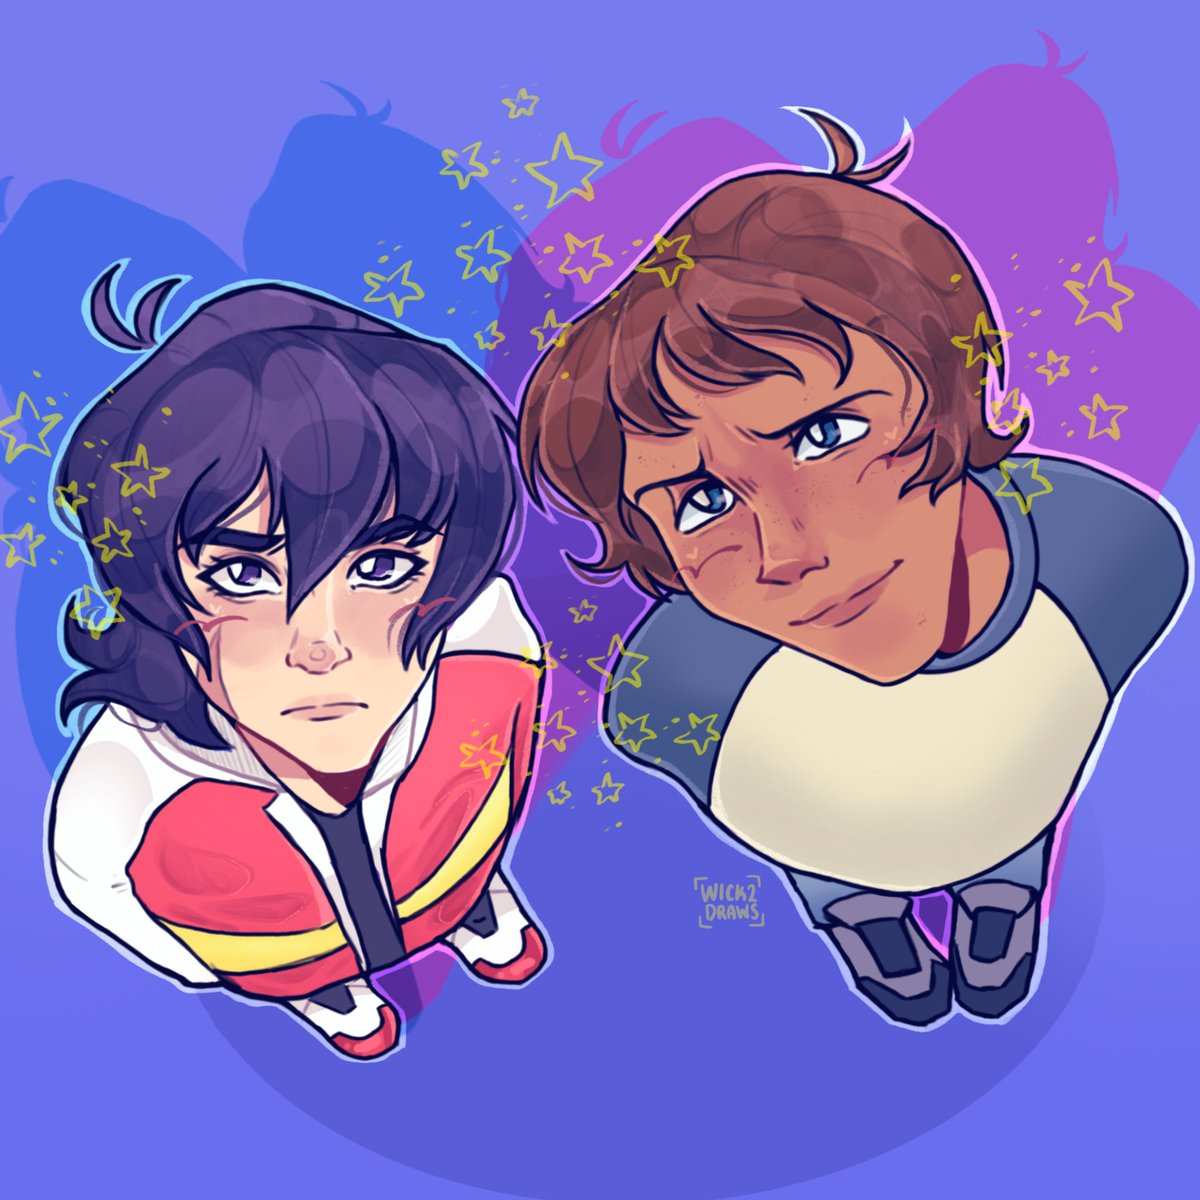 no one:
bugs when you lift up a rock: 

#klance #vld #Voltron #keithkogane #lancemcclain